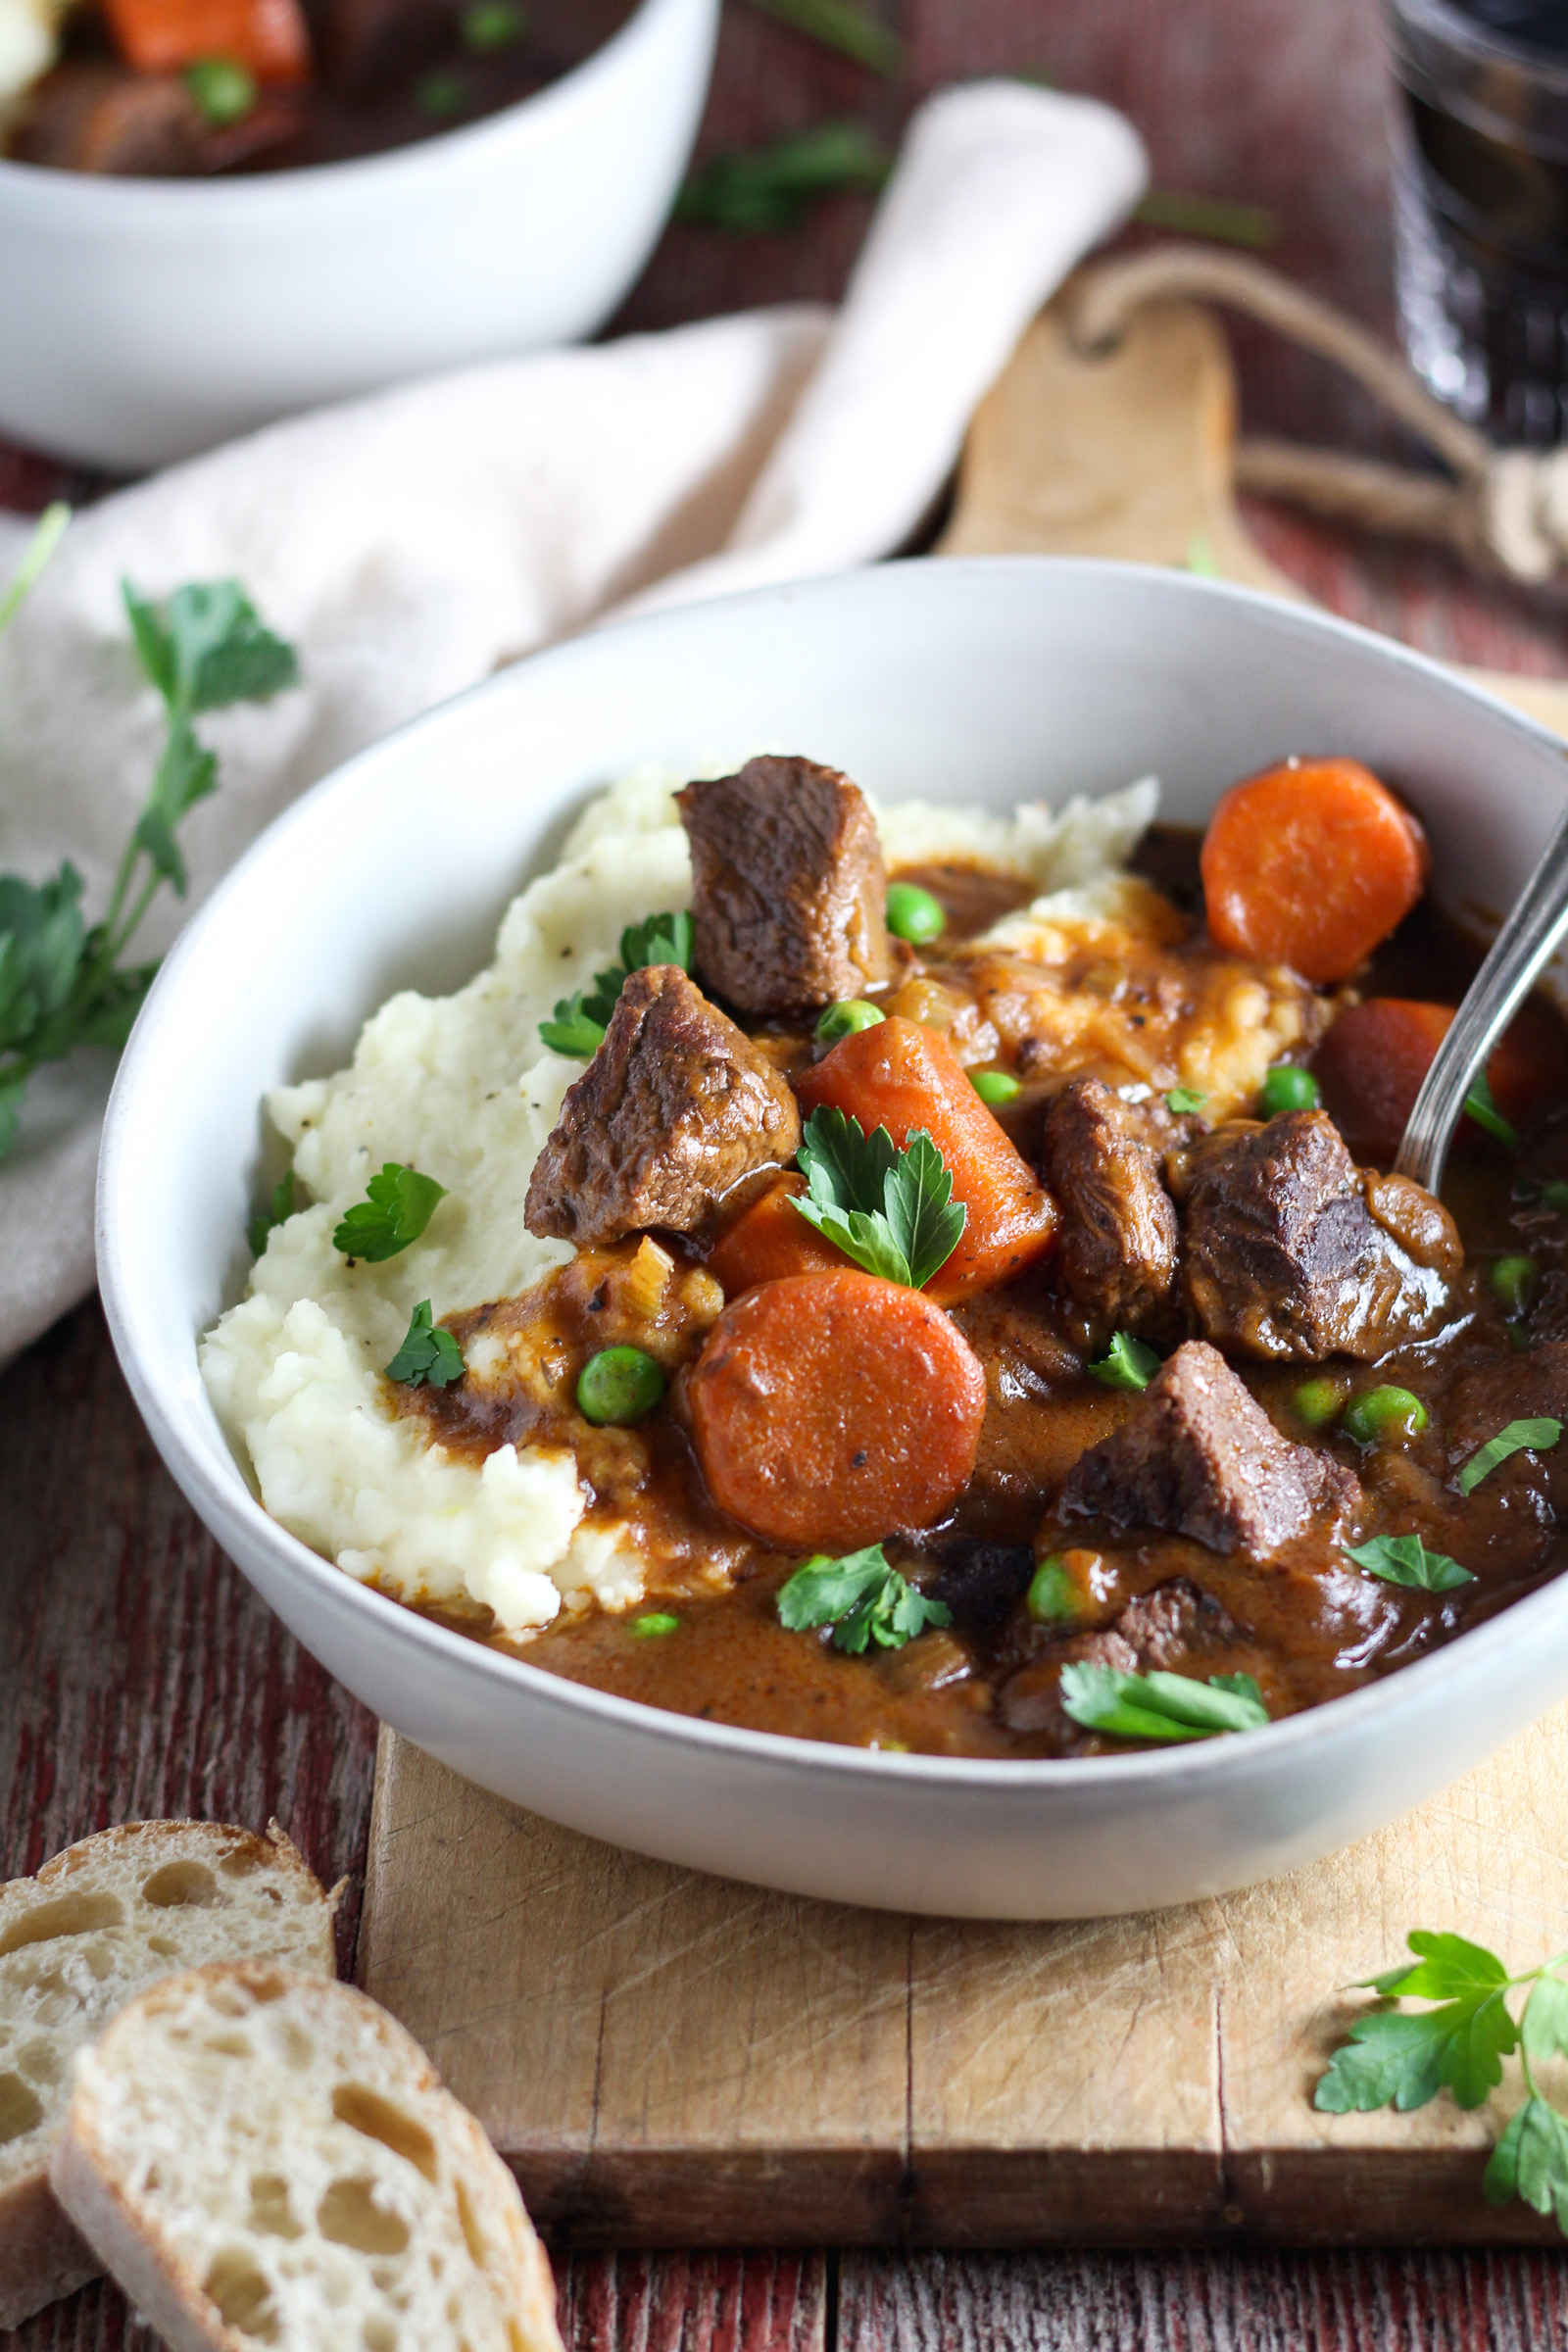 Insanely tender, fall-apart beef, carrots and peas smothered in rich gravy made with Jameson whiskey and Guinness beer. This stew packs incredible flavor and is served over creamy garlic mashed potatoes, making it the ultimate comfort food. Slow cooked in the crockpot, it’s easy to make and perfect for feeding a crowd on St. Patrick’s Day!